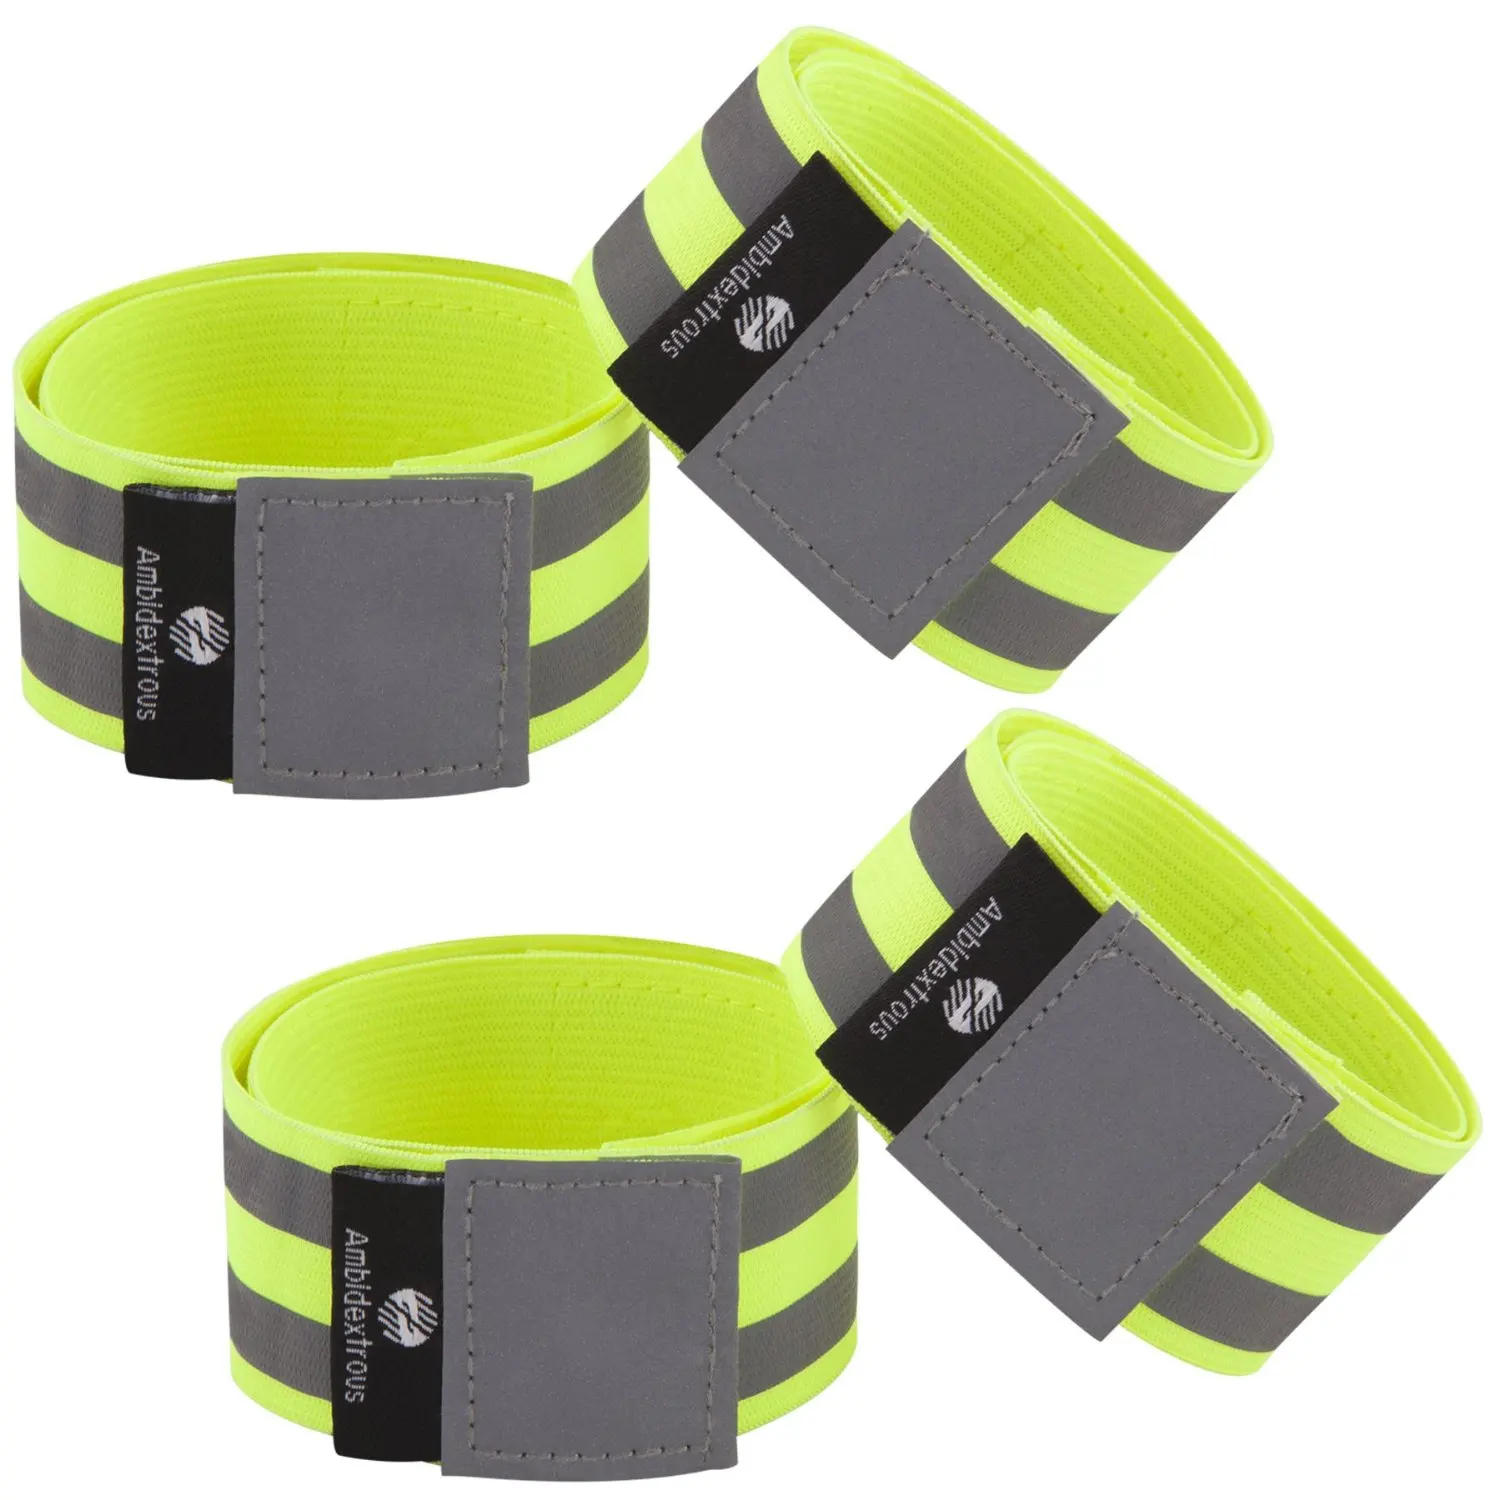 Reflective Snap Bands Reflective Arm Bands High Visibility Ankle Bands Wristbands Trouser Binding Belt Safety Gear for Running Cycling Walking Hiking Dog Walking Jogging-Automatic Curling Adjustable